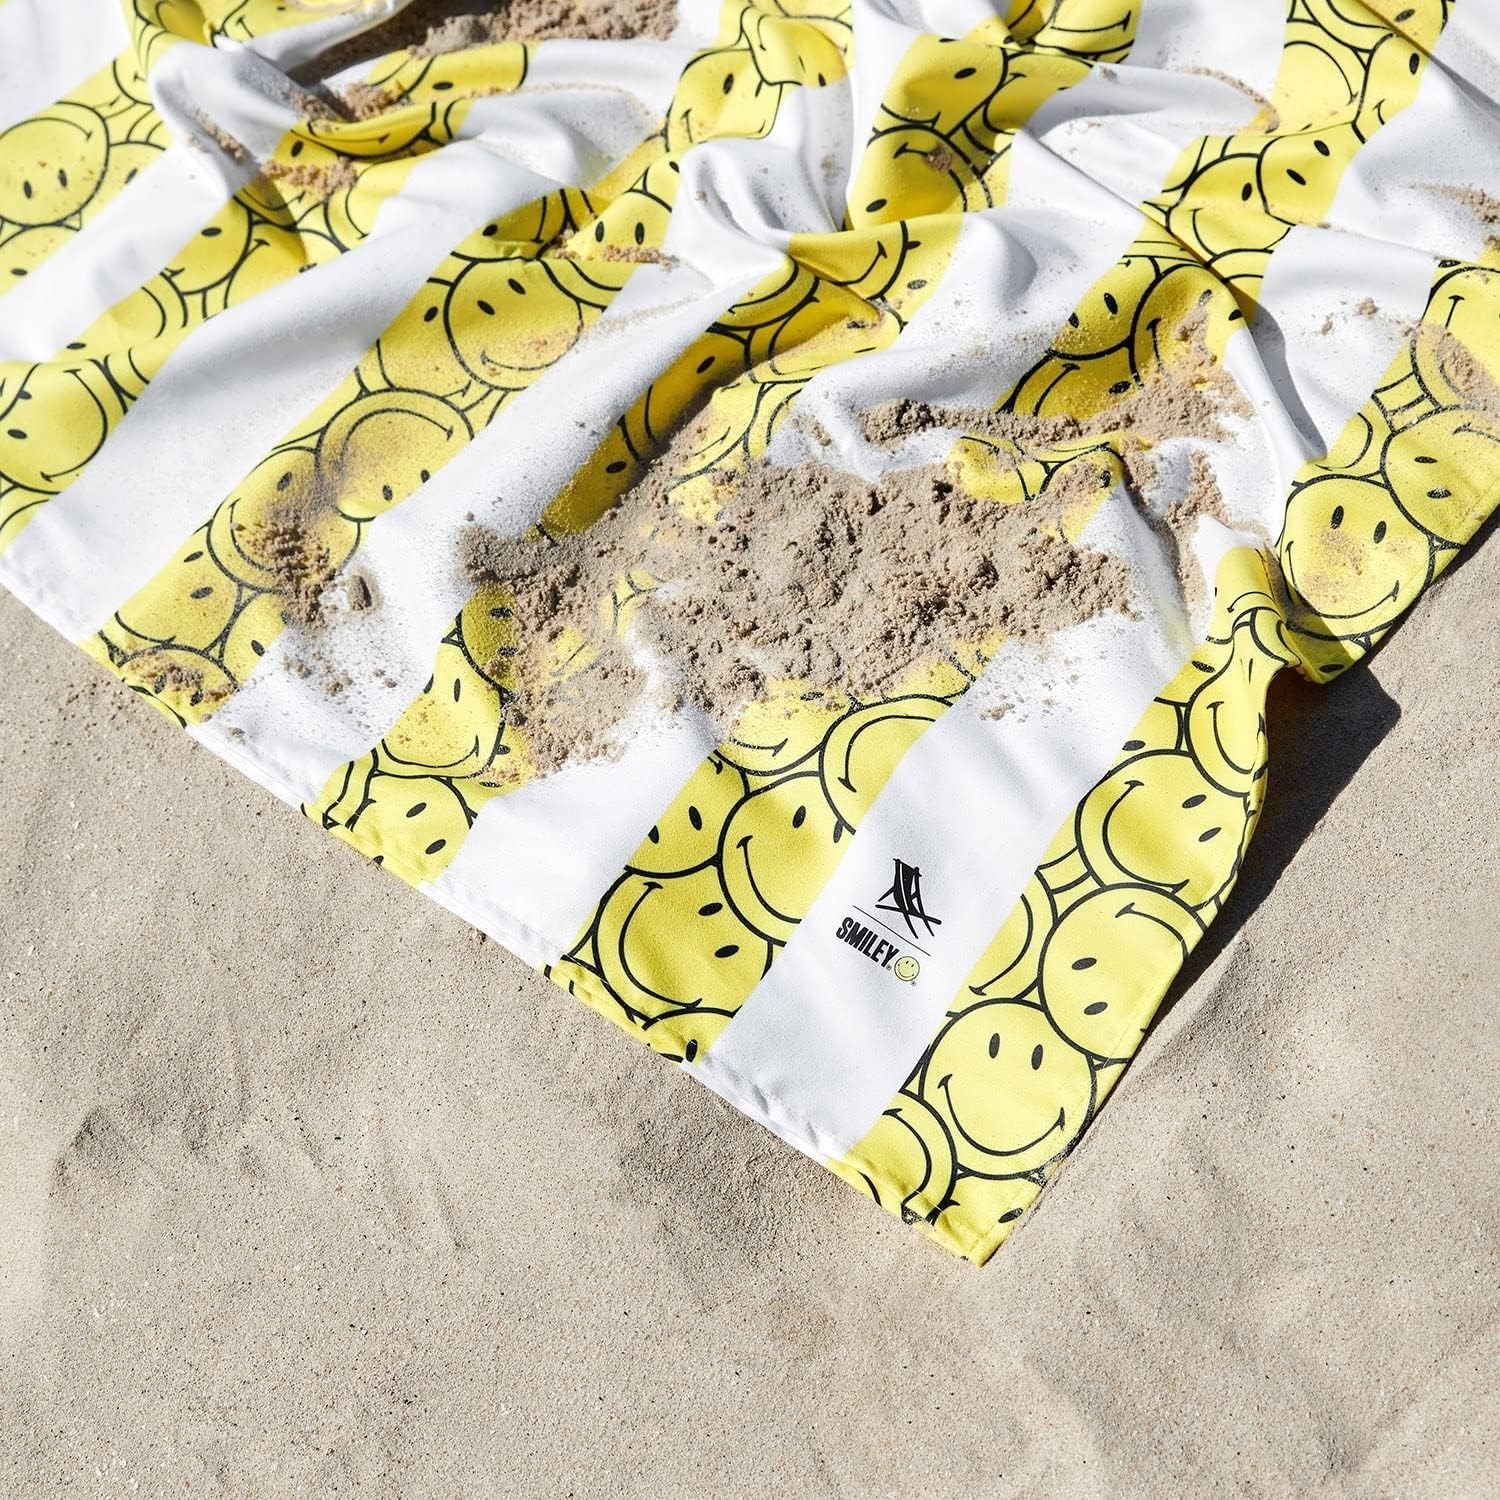 the smiley face print towel in the sand